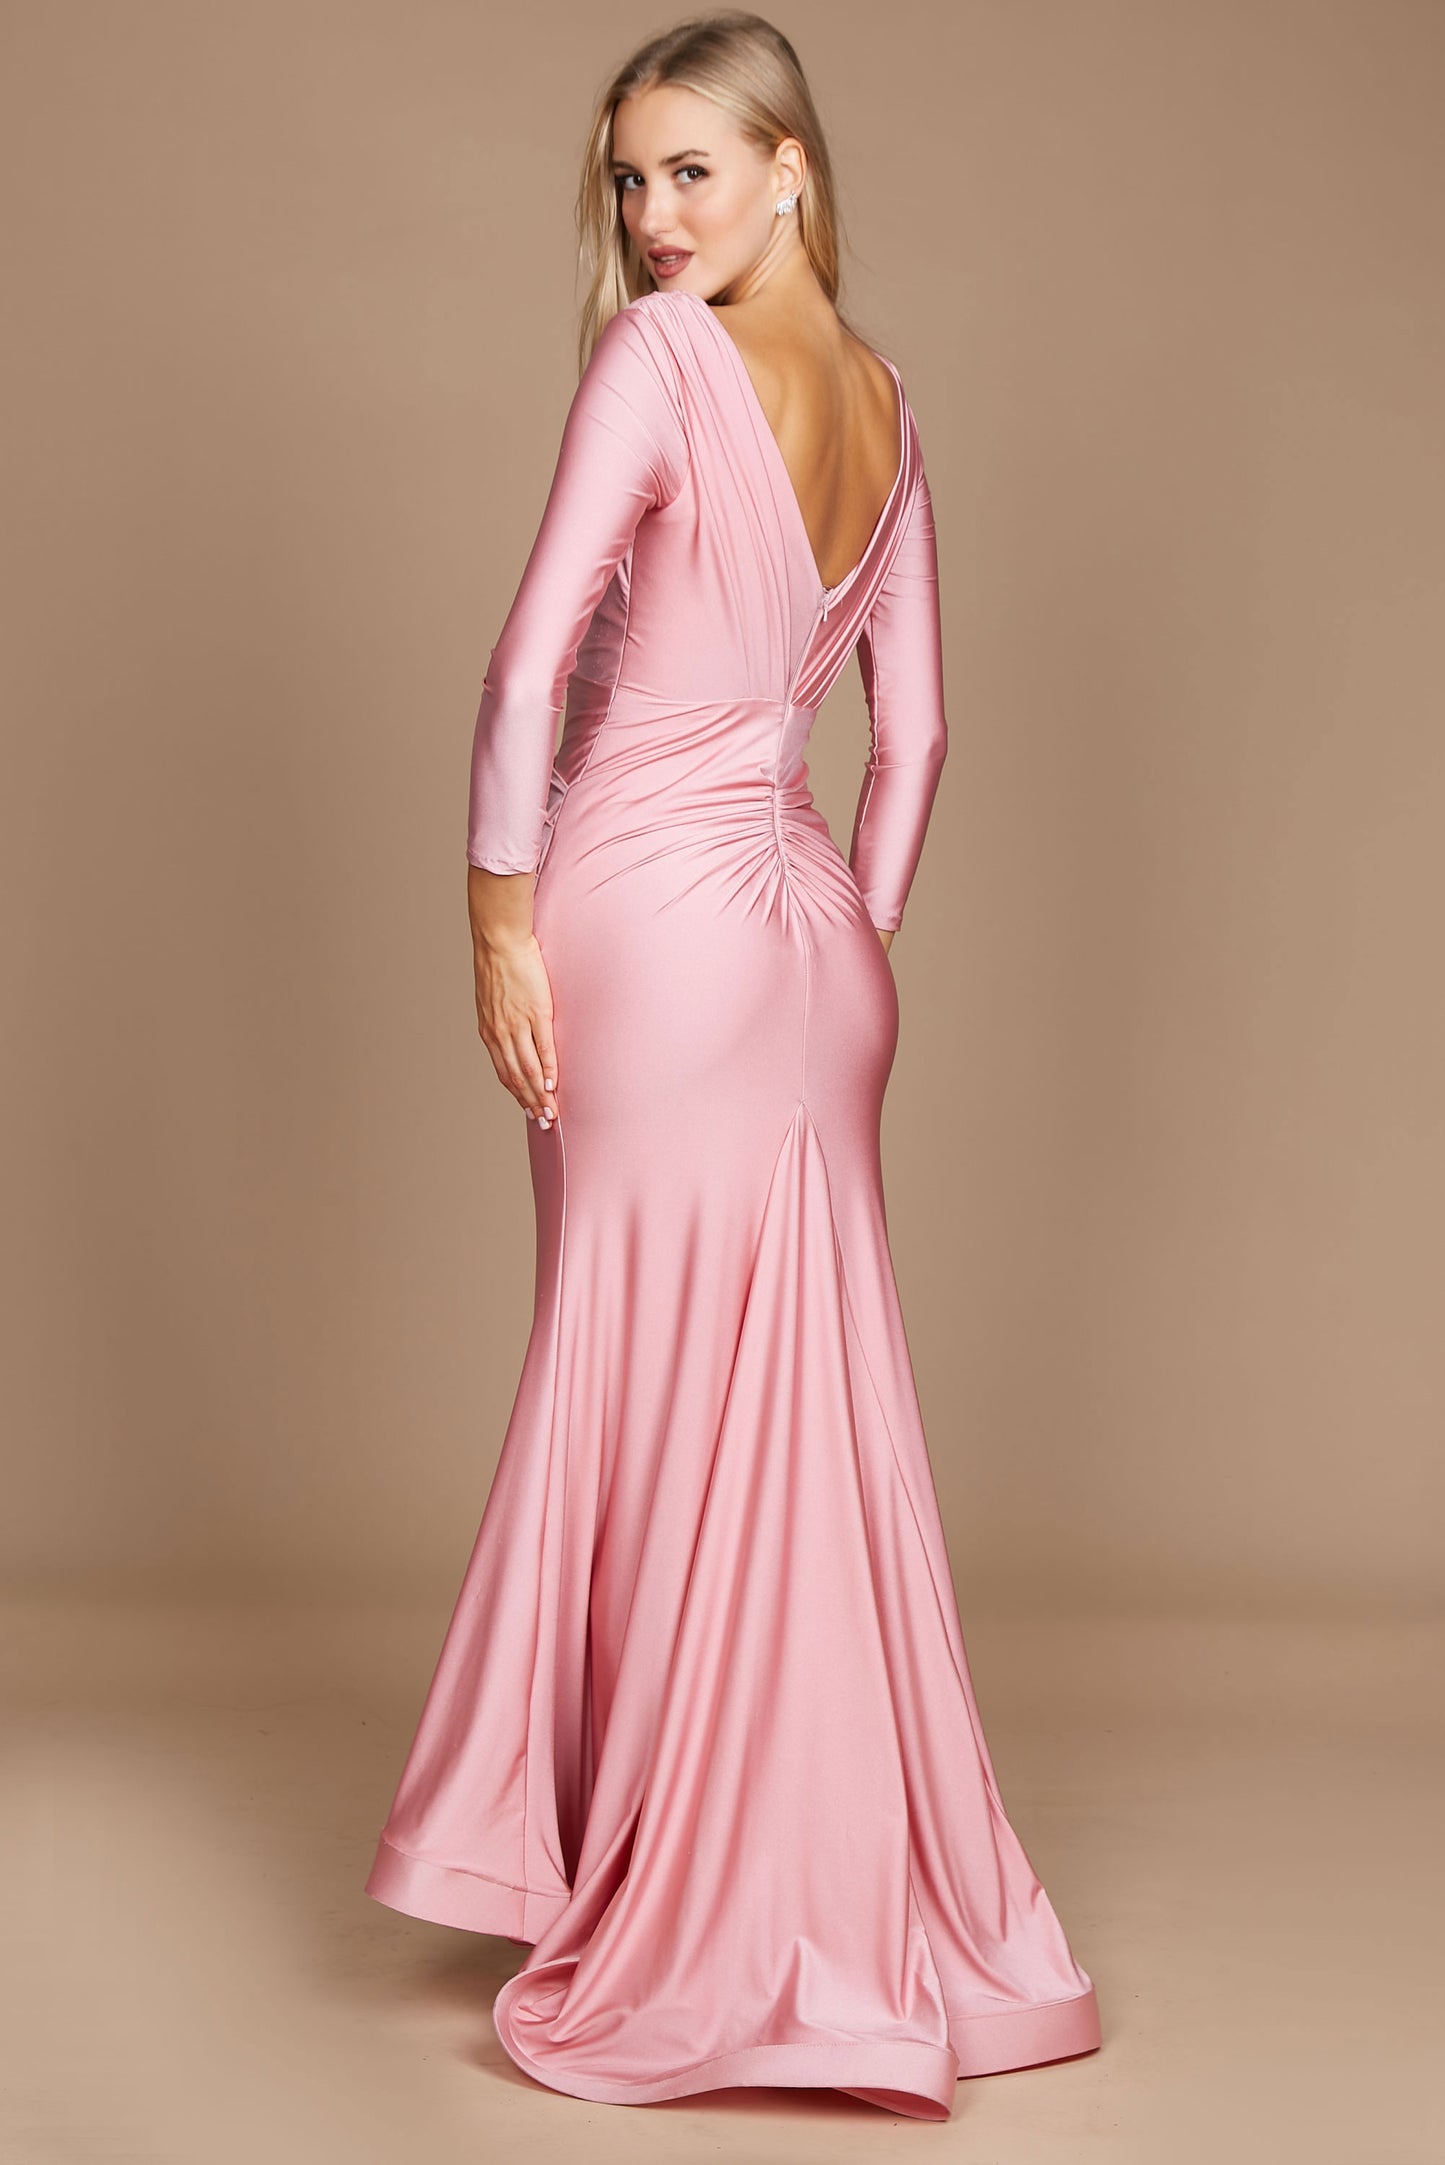 Formal Dresses Long Sleeve Formal Fitted Evening Dress Pink